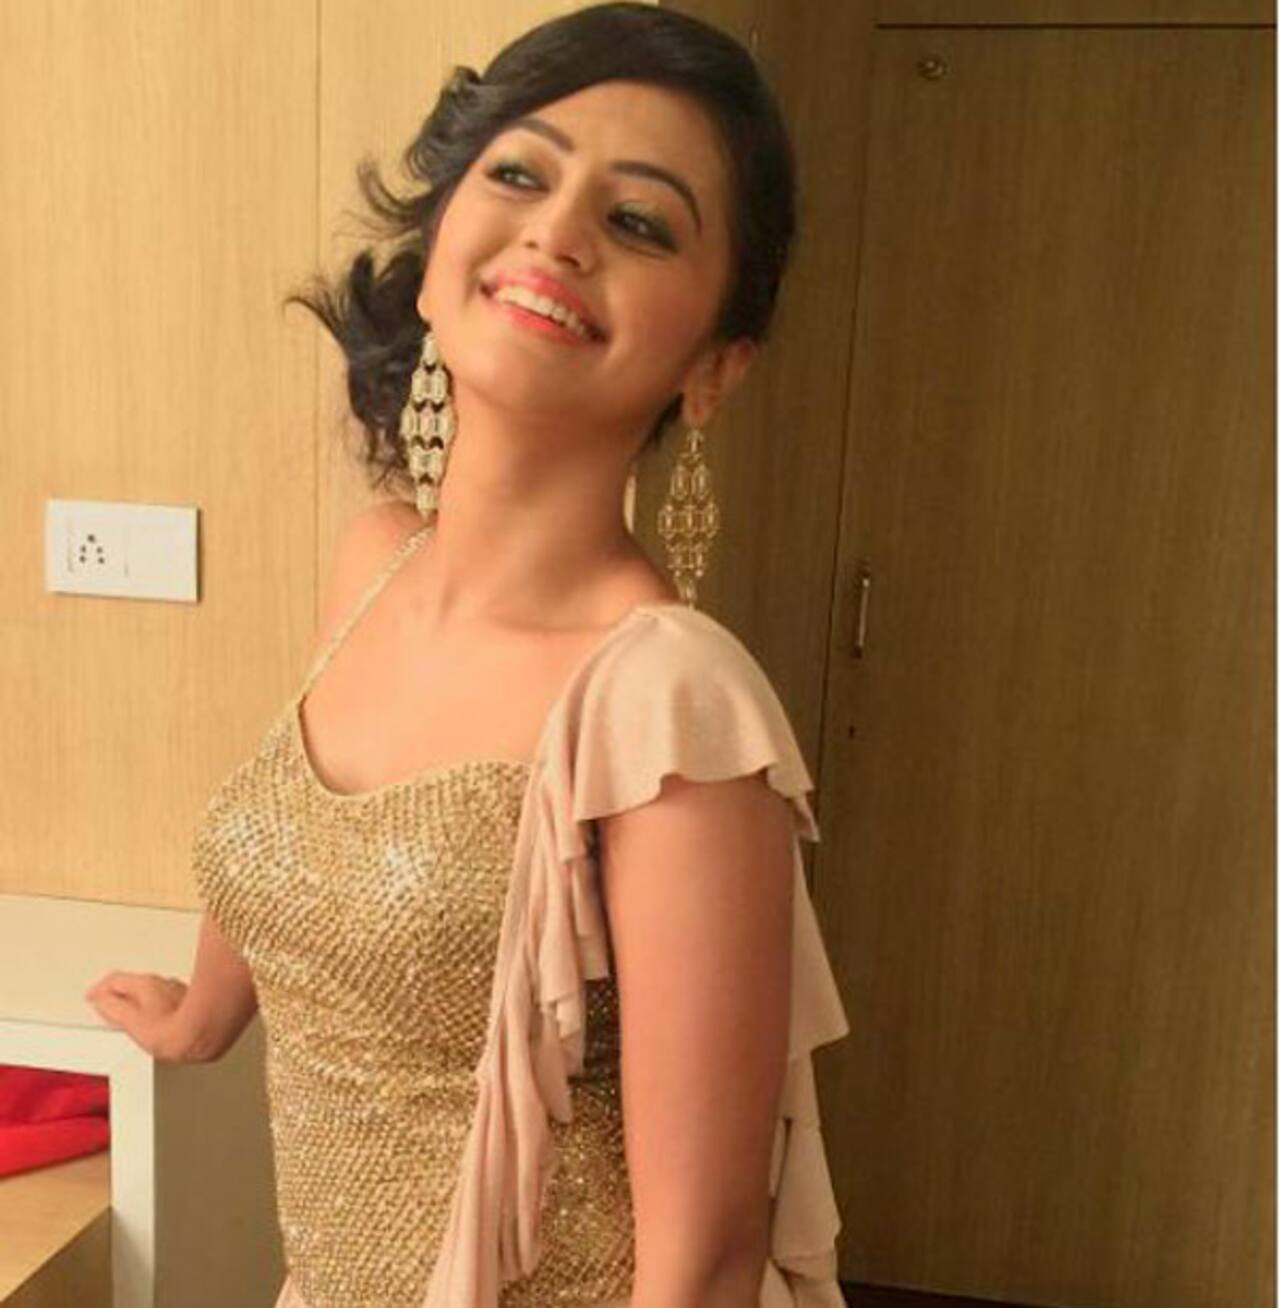 Jhalak Dikhhla Jaa 9: Helly Shah ends up crying on the show!